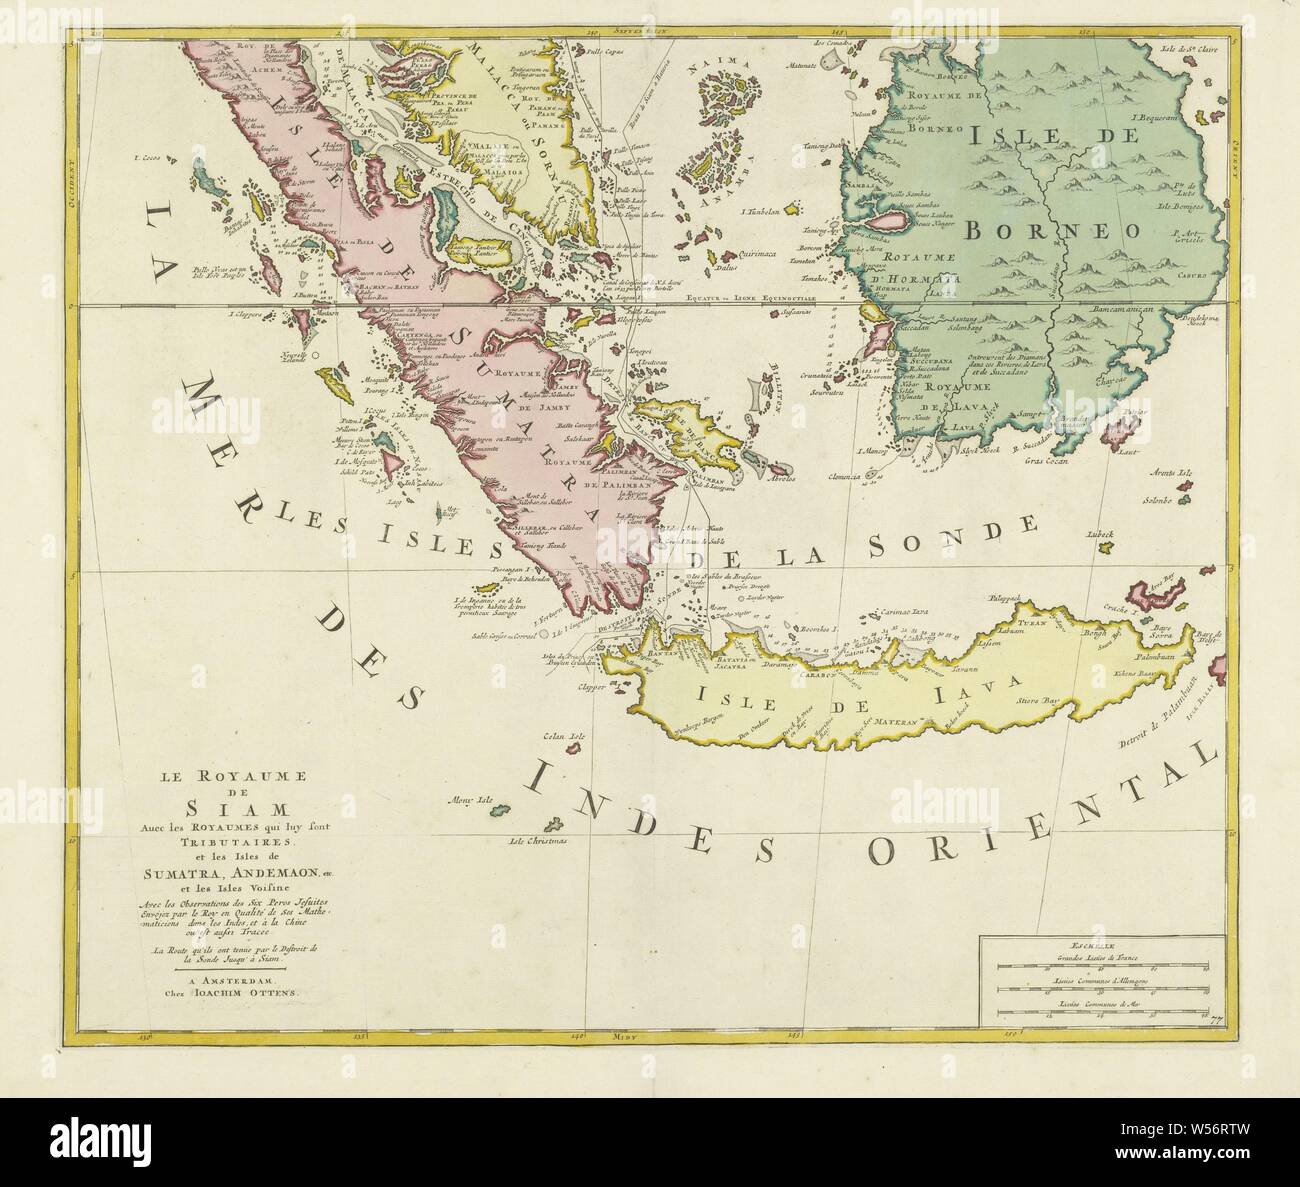 Map of the Kingdom of Siam (lower half), Le Royaume de Siam, avec les royaumes qui lui sont tributaires and les iles de Sumatra, Andemaon, etc, et les iles Voisines (title on object), Map of the Kingdom of Siam (Kingdom of Ayutthaya) and its vassal states. Different areas colored differently. Depicted are the islands of Sumatra, Java and Borneo and part of Malacca. A dotted line and a normal line indicate the route of the Jesuit cartographers, sent by the king, through the area, from top to center. Bottom right scale in French, German and nautical miles. Bottom part of a map of the entire Stock Photo